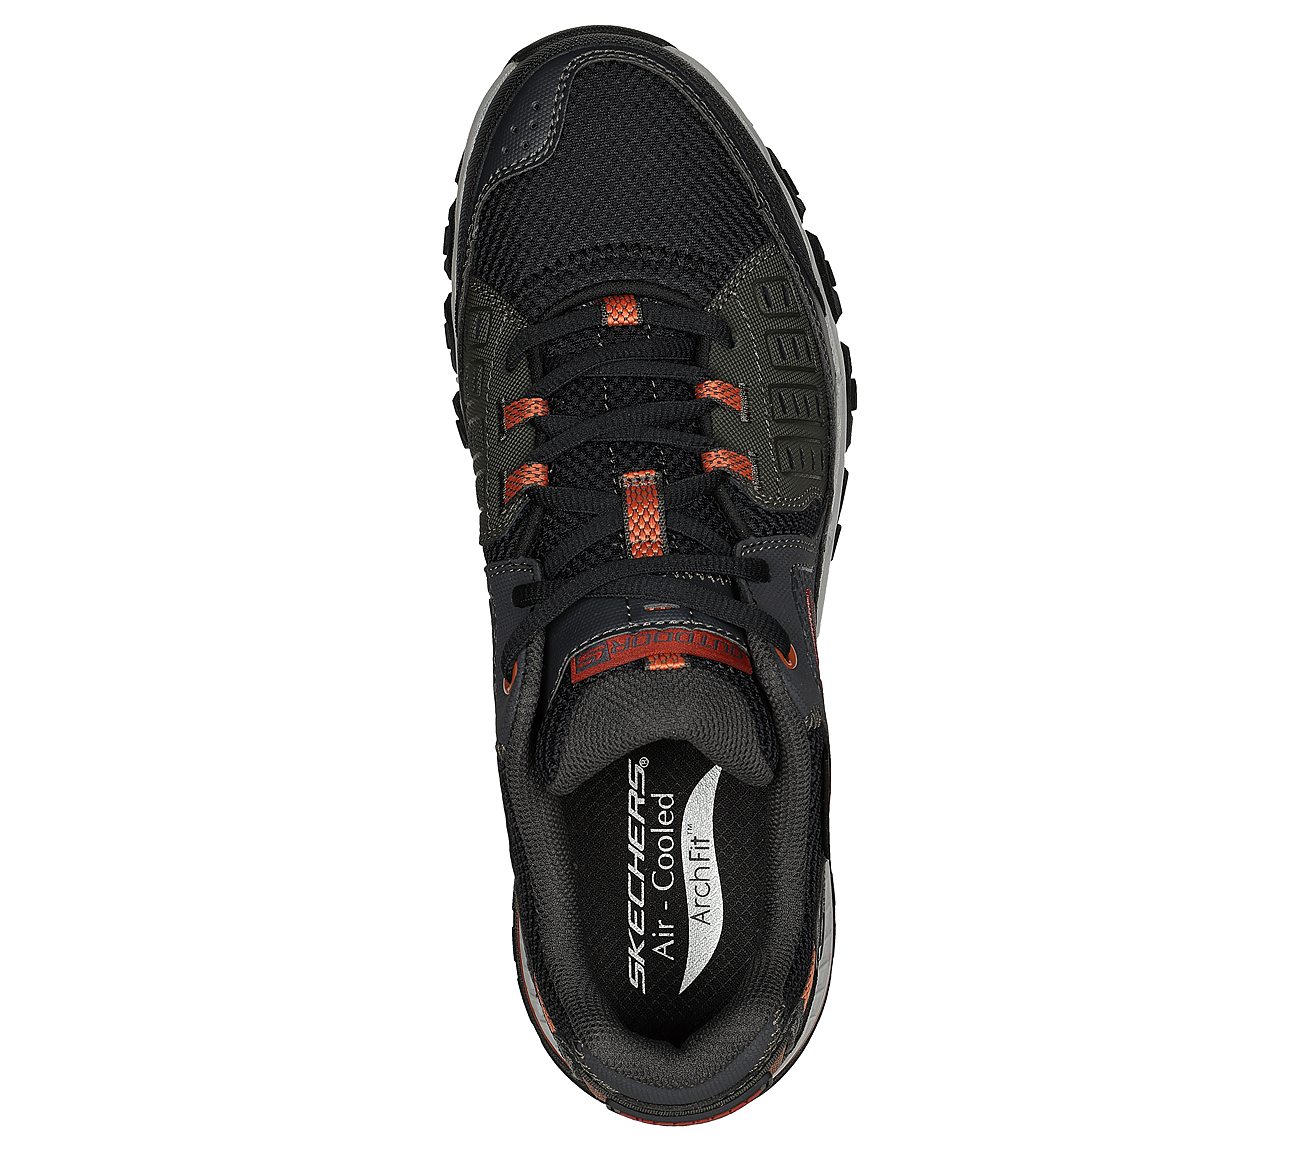 ARCH FIT ESCAPE PLAN, NAVY/CHARCOAL Footwear Top View